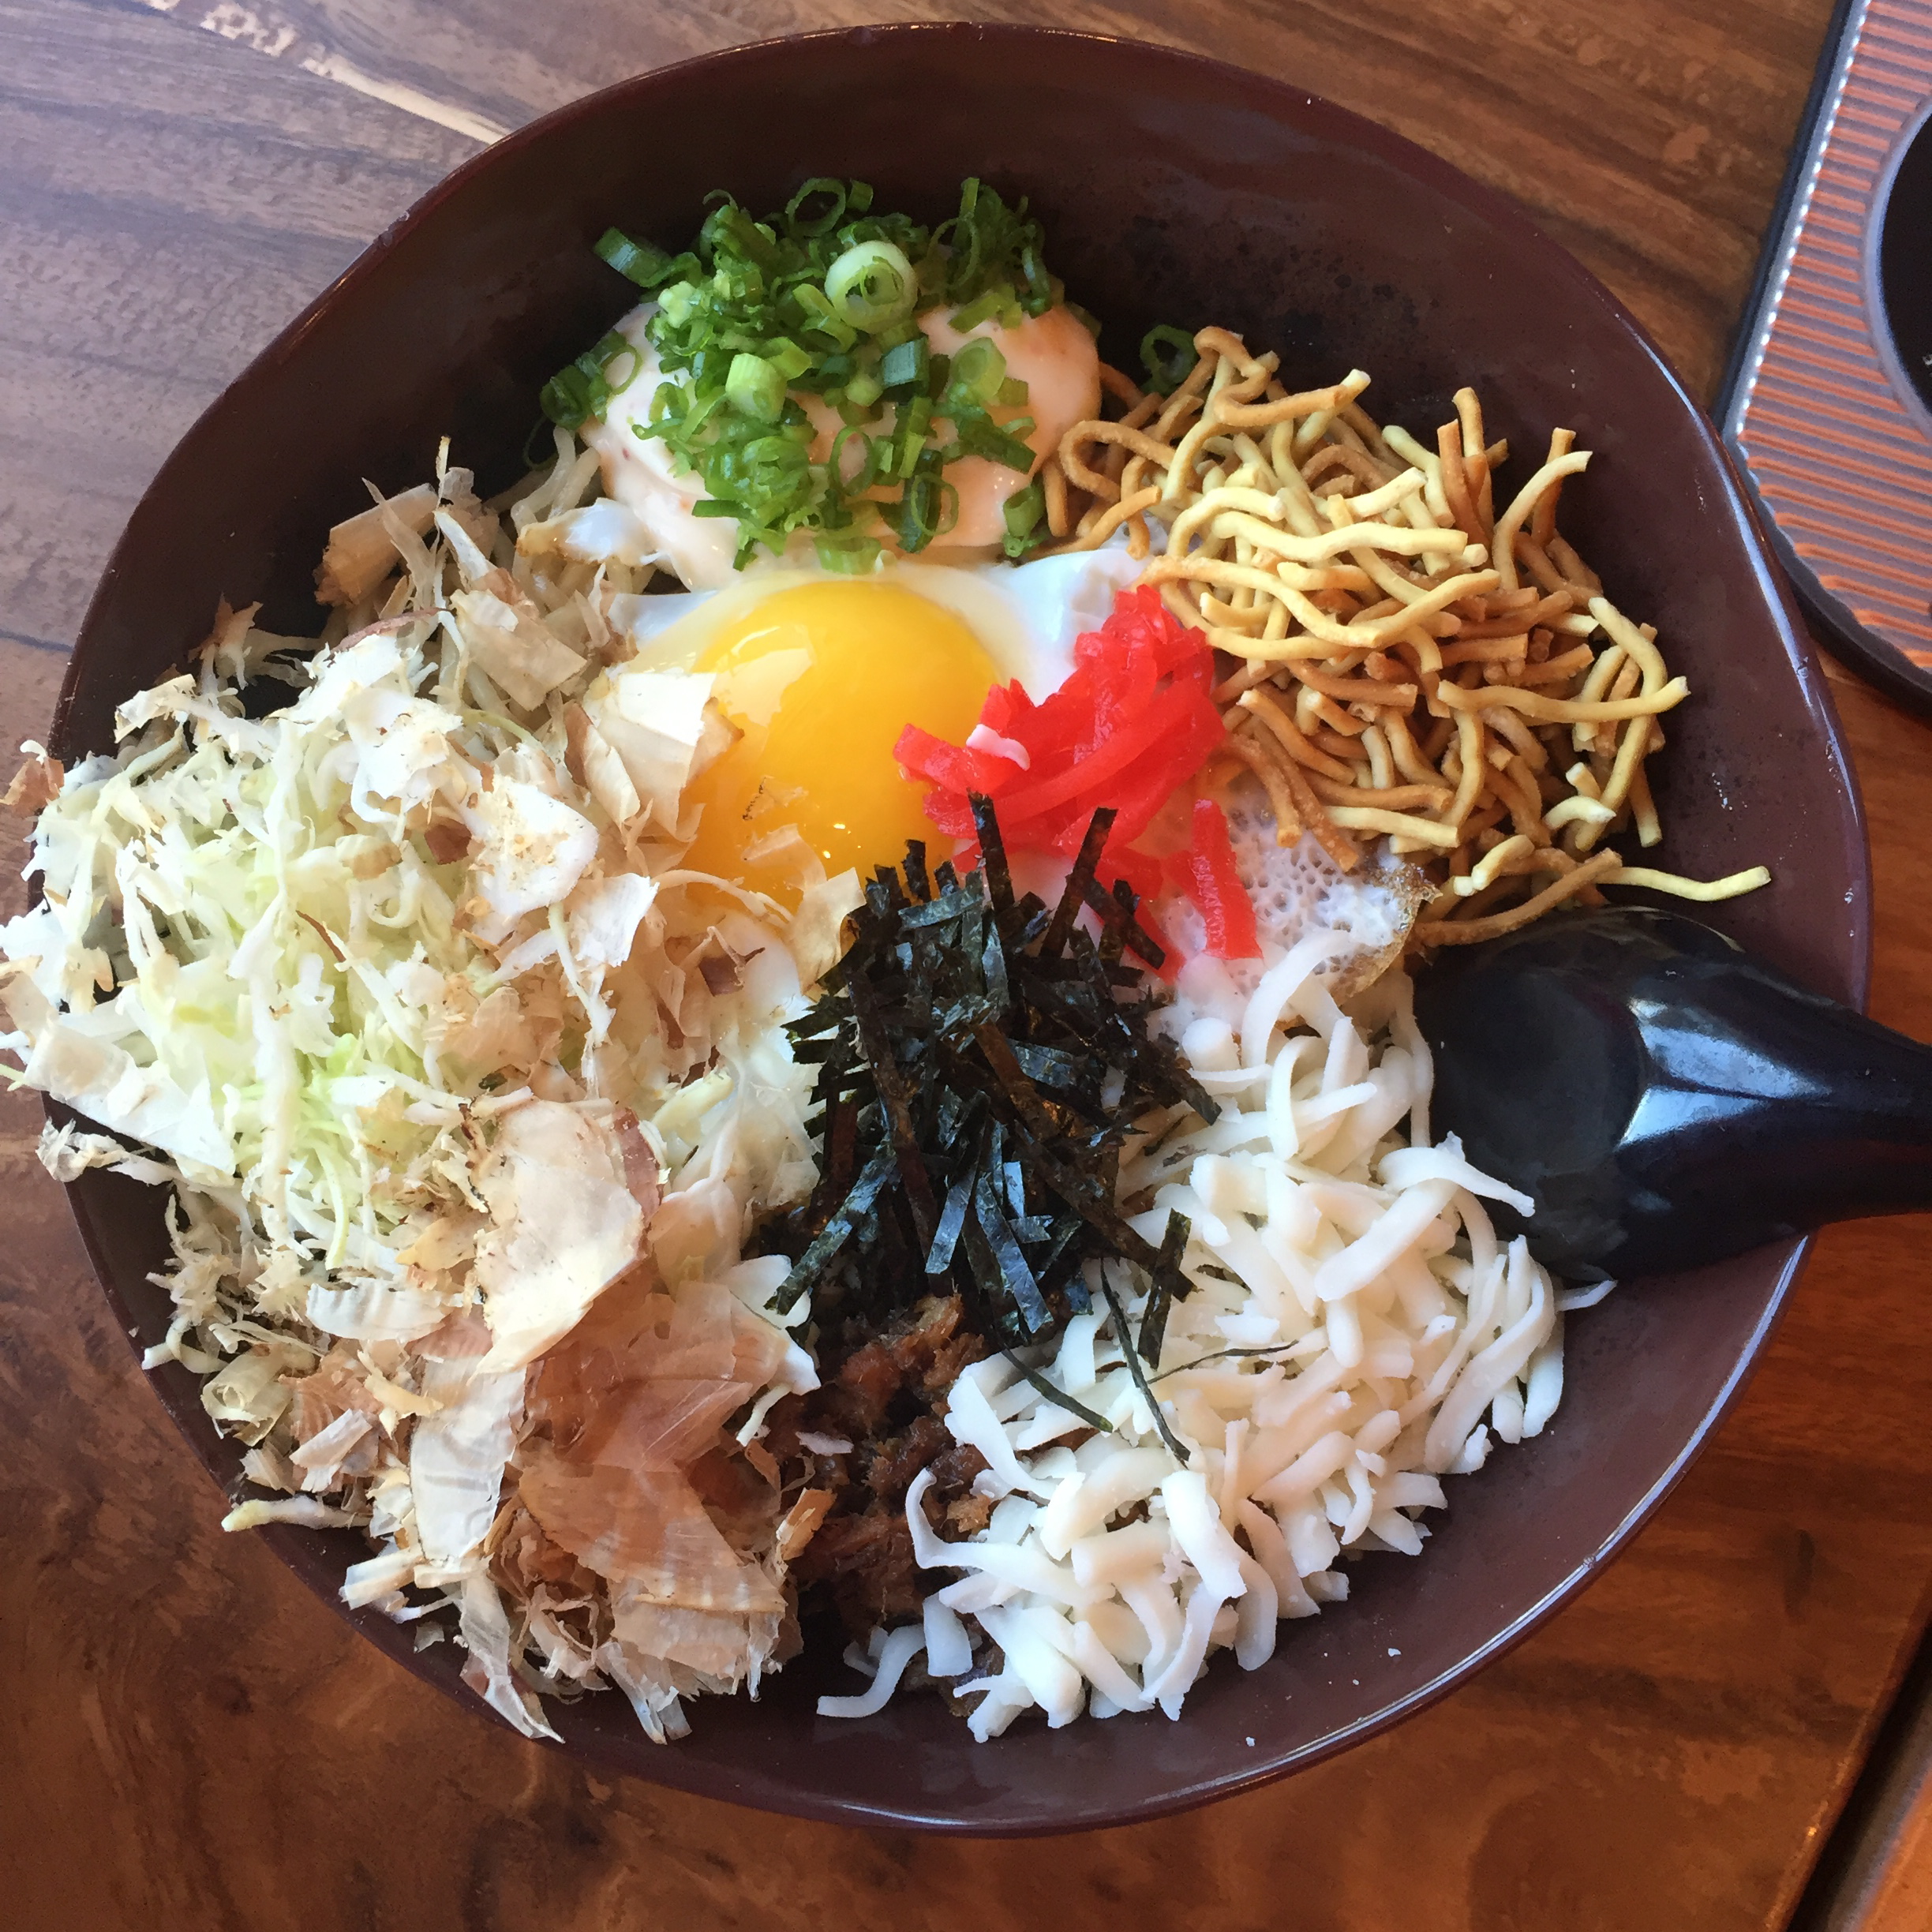 Colorful bowl of ramen with various ingredients from Fukuryu Ramen